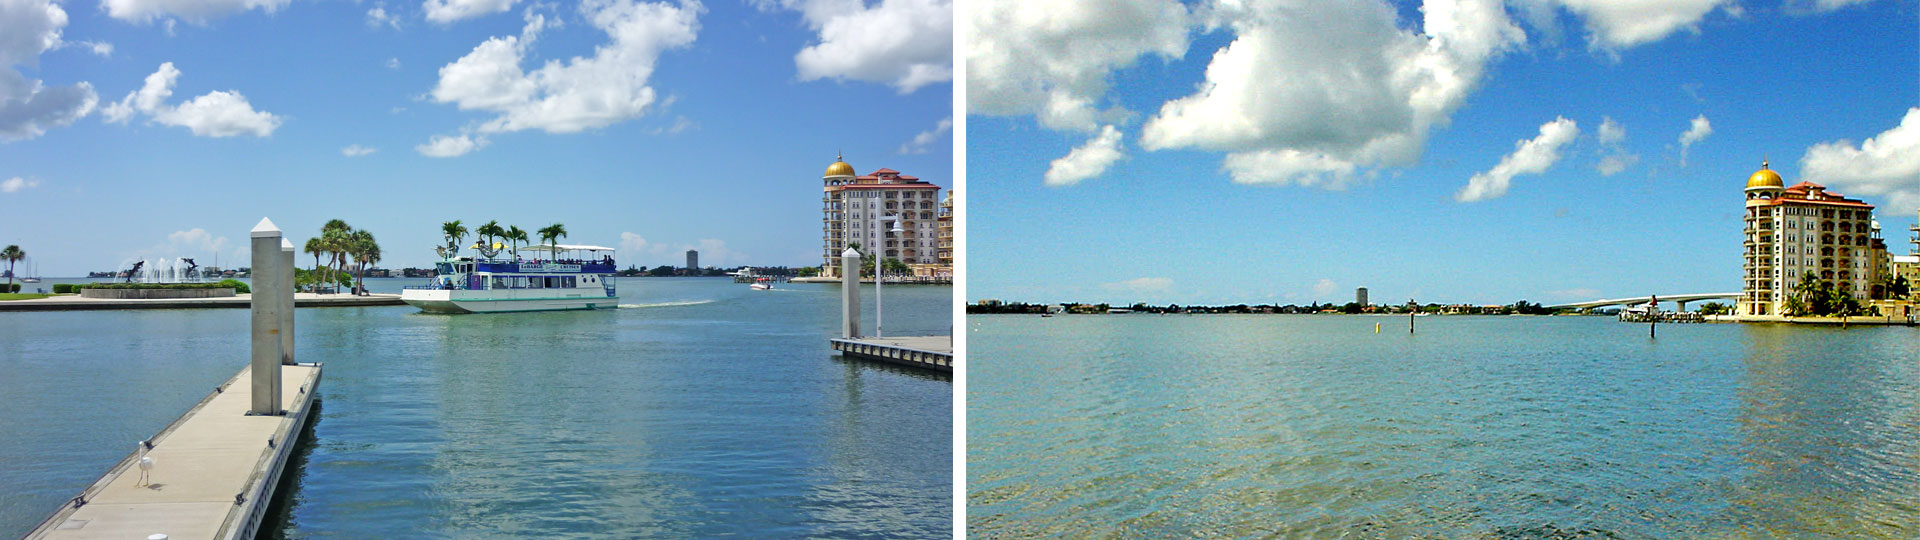 Two views from Marina Jack